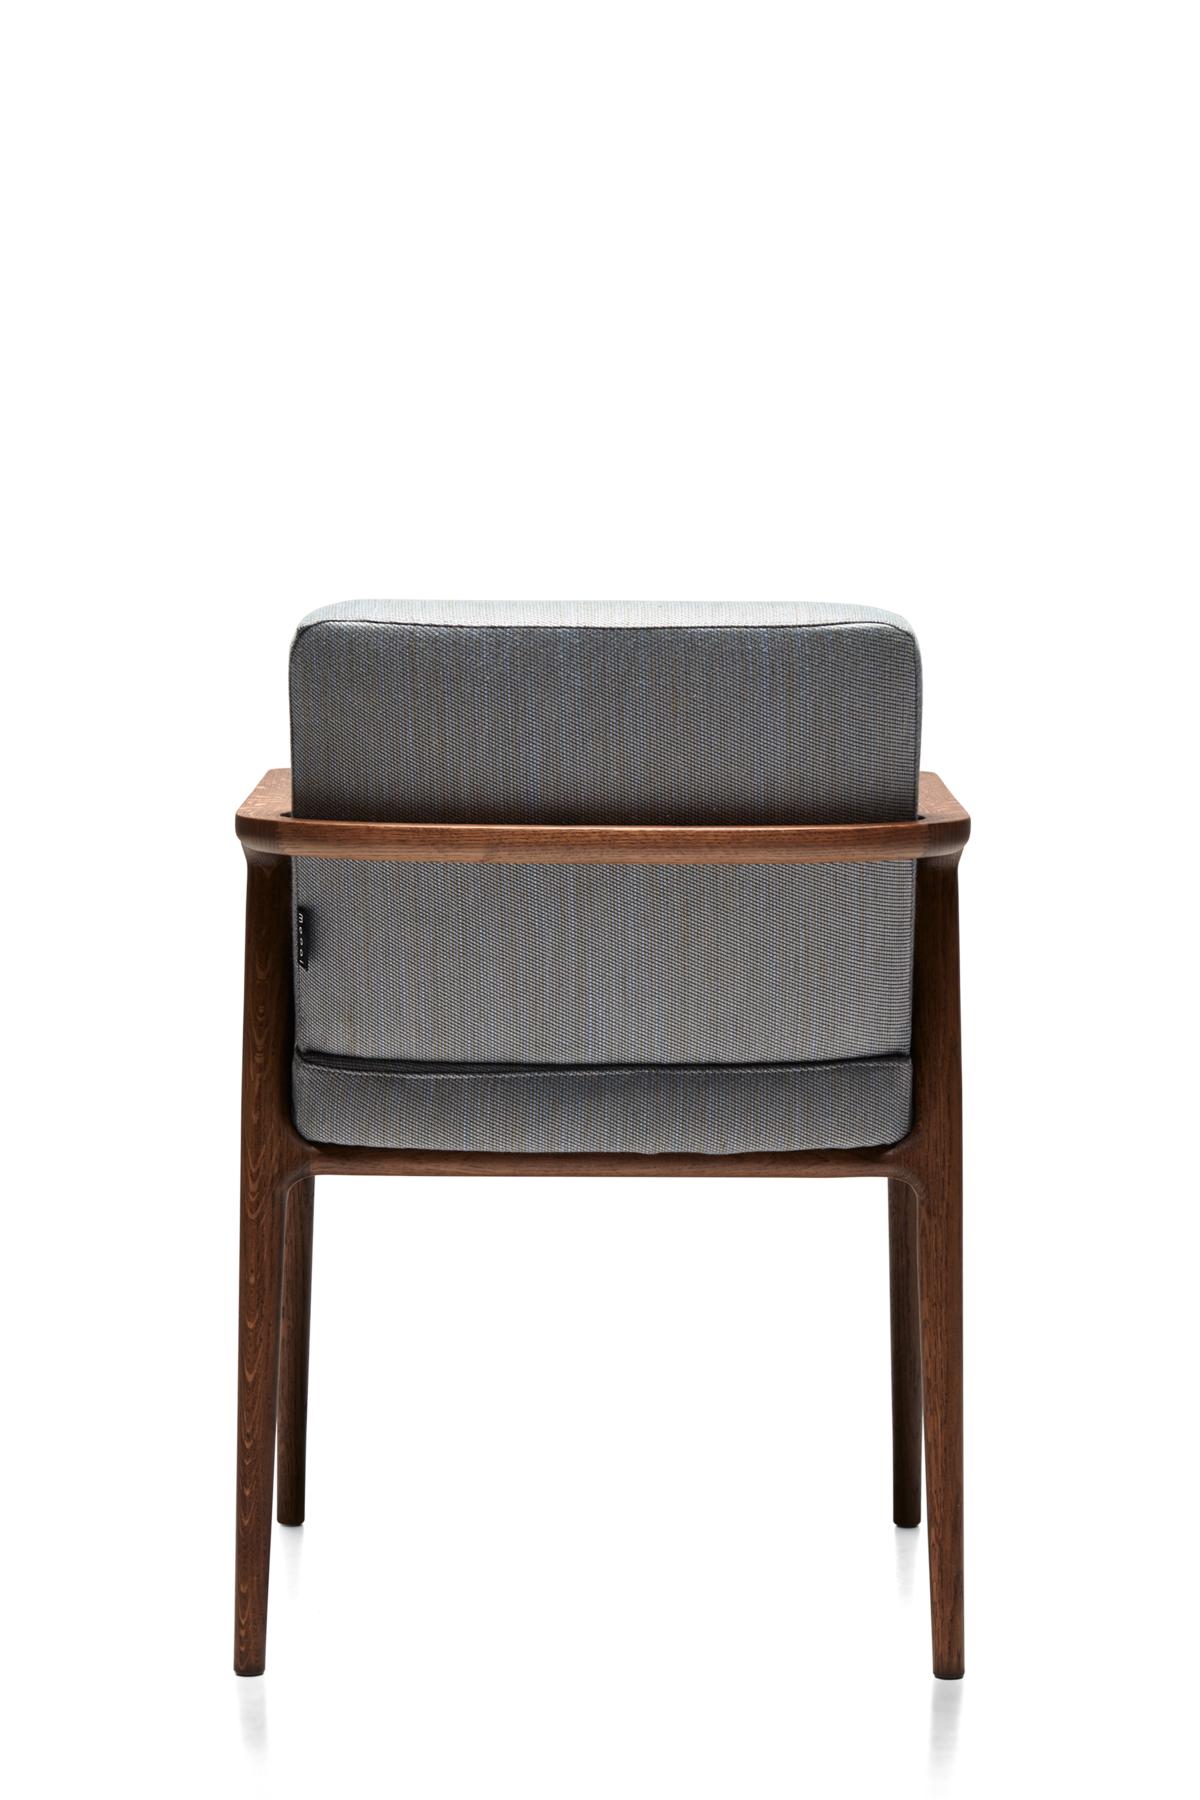 Moooi Zio Dining Chair in Griffin Upholstery with Oak Stained Cinnamon Frame In New Condition For Sale In Brooklyn, NY